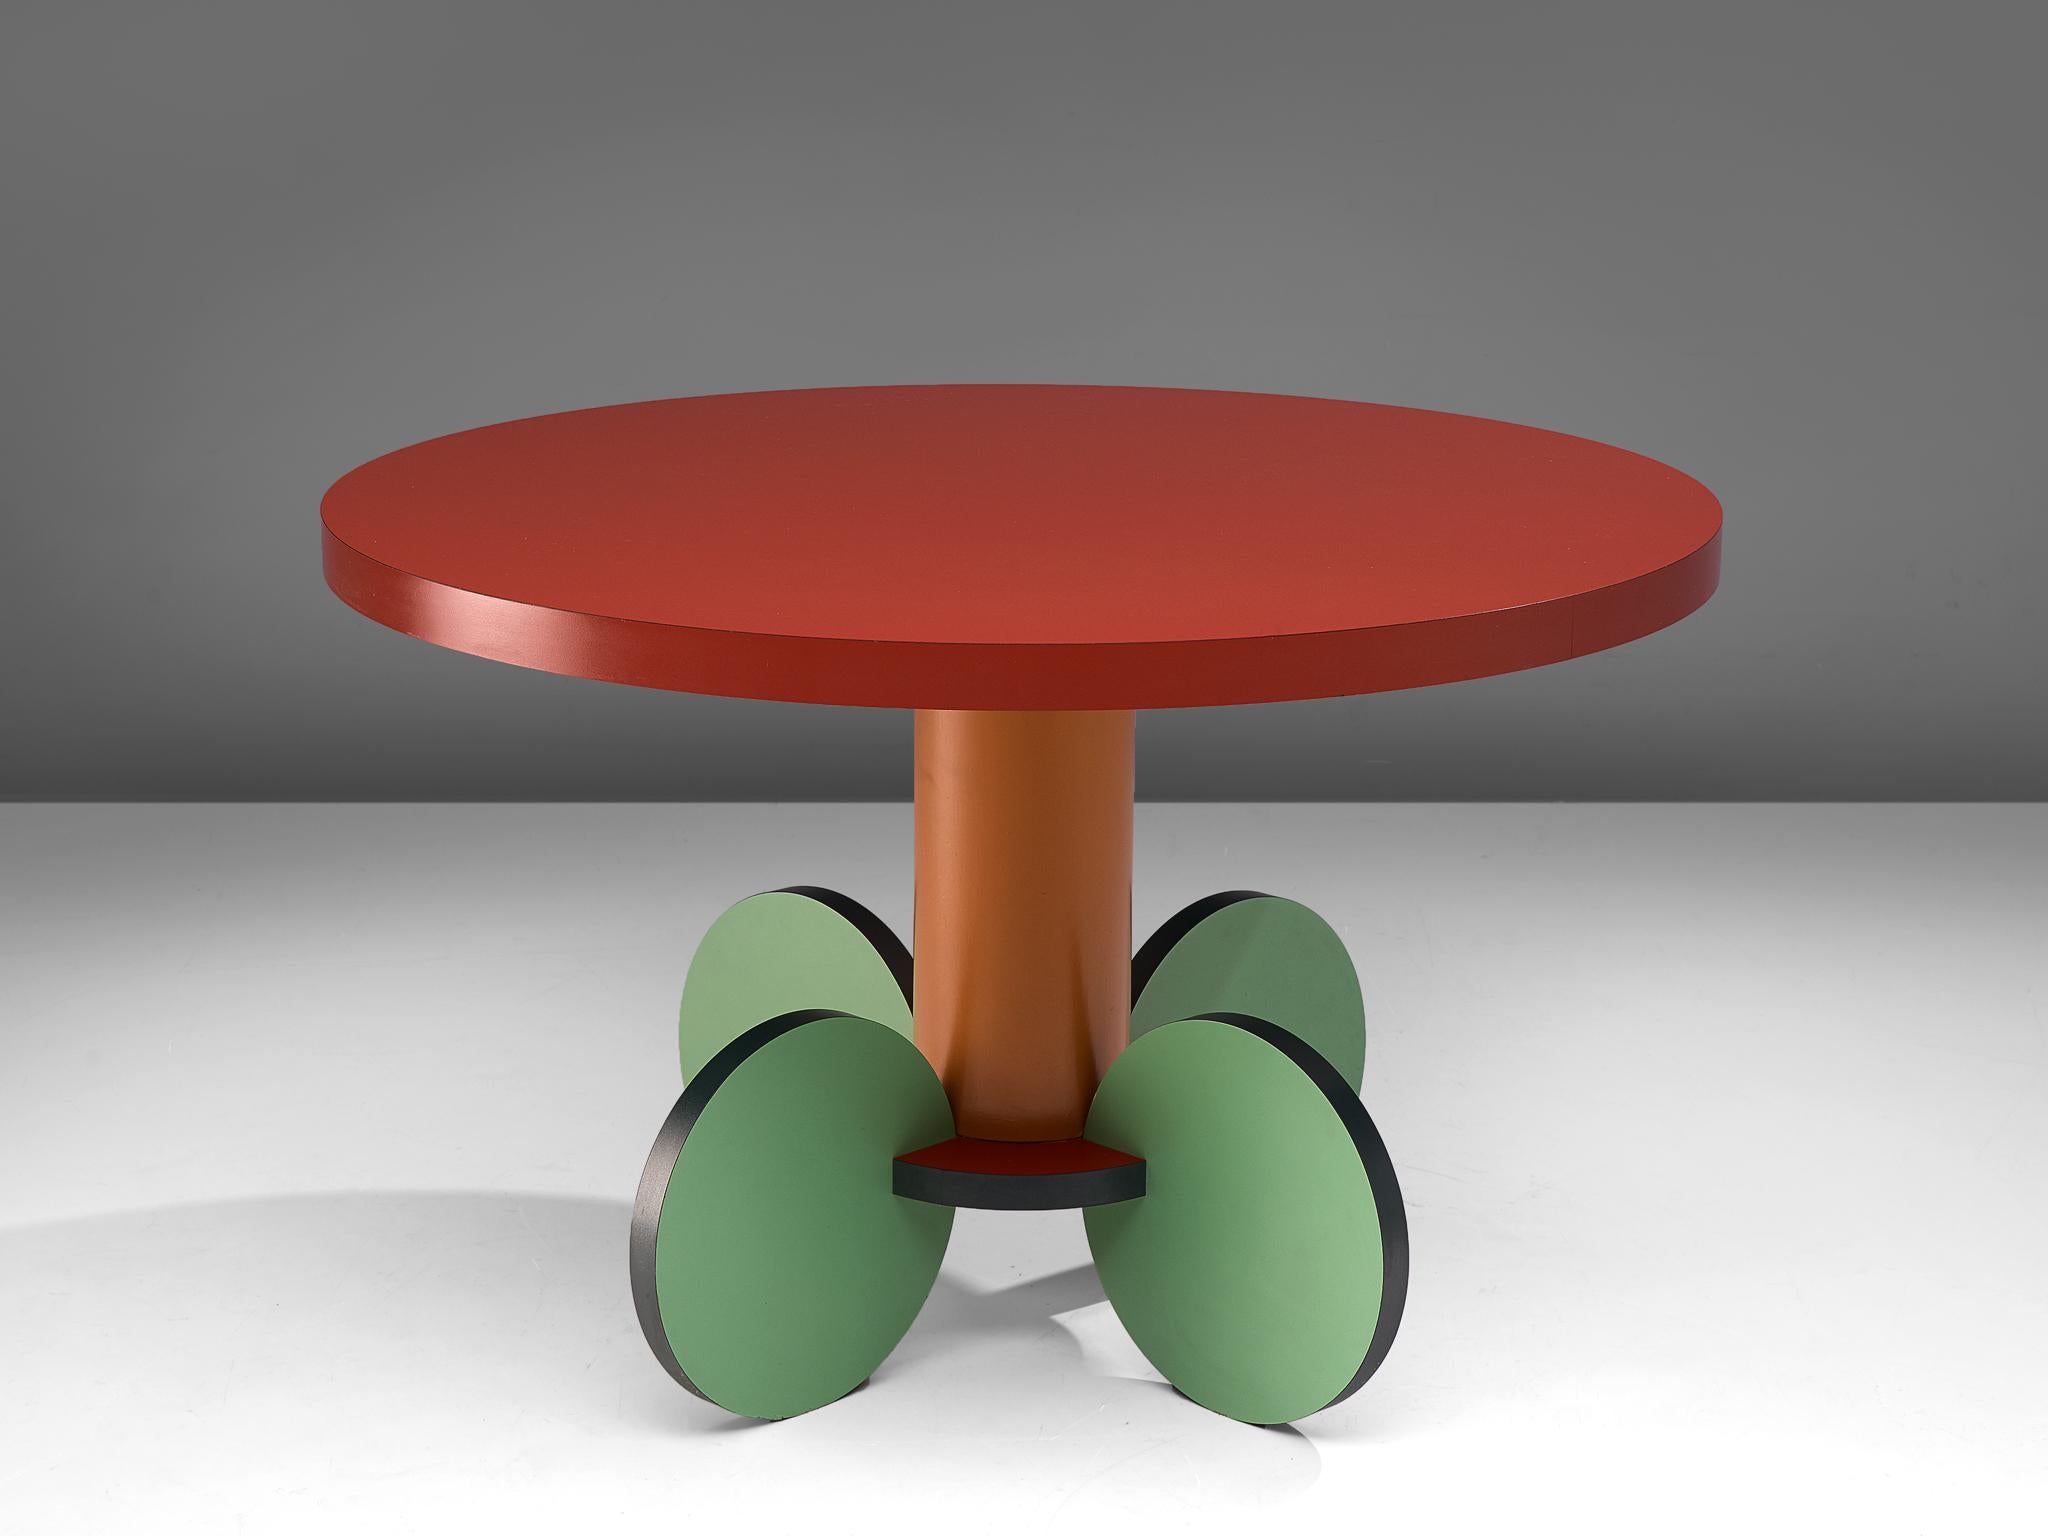 Michele de Lucchi, dining table 'La Festa', laminated wood, Italy, 1984.

Postmodern round dining or center table named La Festa, designed by the Italian Michele de Lucchi. The table features a circular table top in red laminated wood, resting on